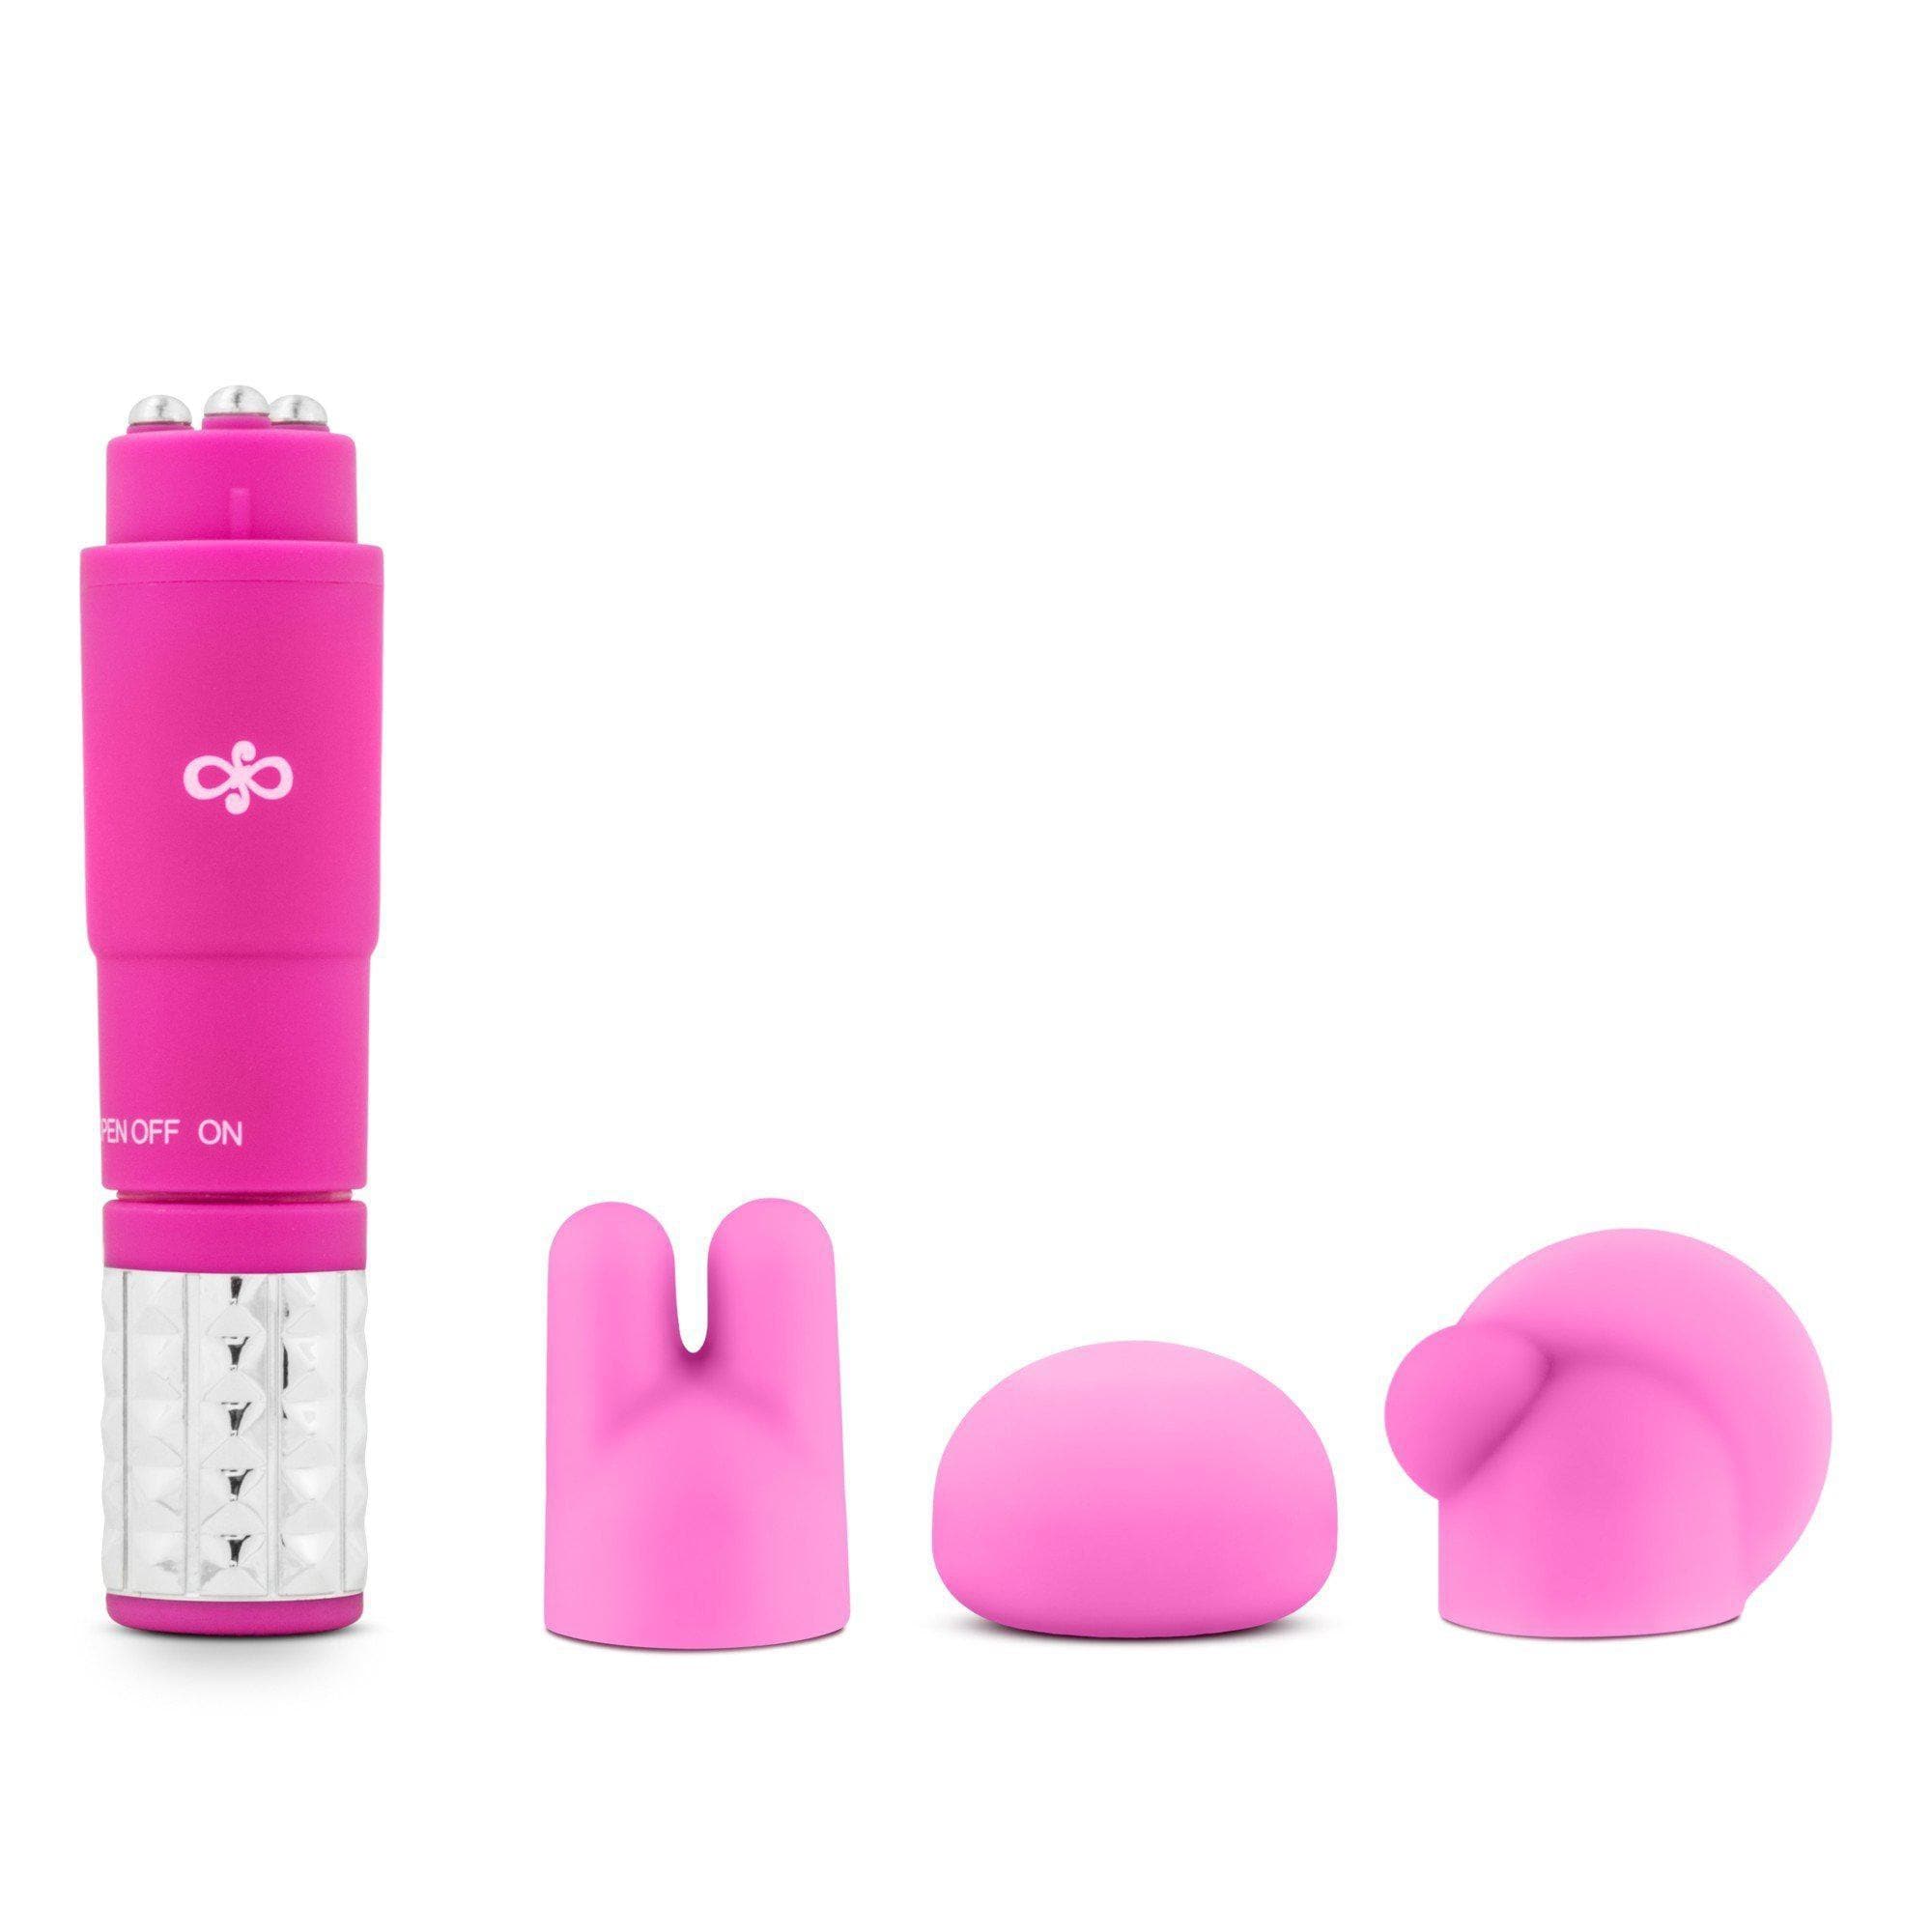 Rose Revitalize Massage Kit with Pocket Vibrator Massager and 3 Attachments - Romantic Blessings